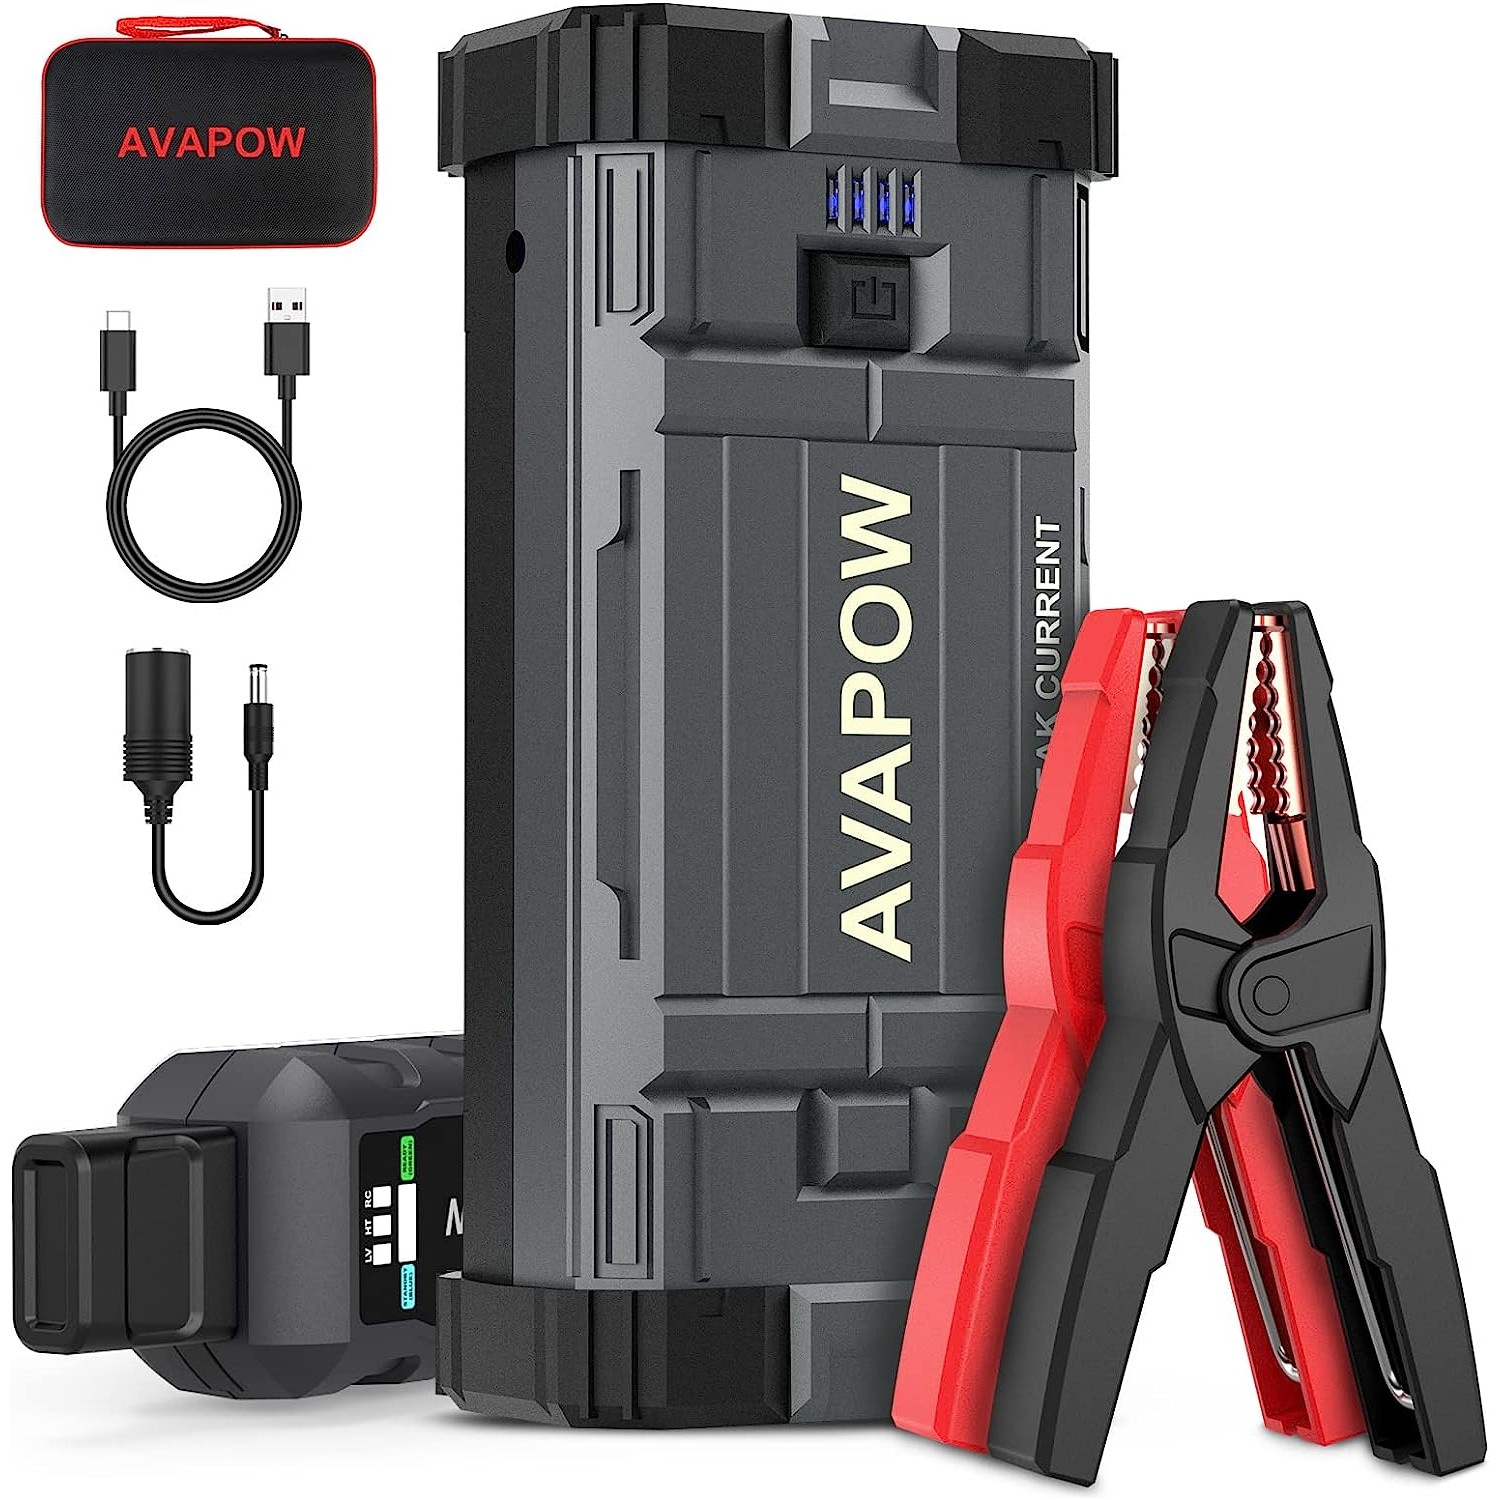 AVAPOW Jump Starter 1500A Peak Current Jumper Cables Kit for Car(Upto 12V  7L Gas/5.5L Diesel Engine) with USB Quick Charging and 400 Lumen LED Jump